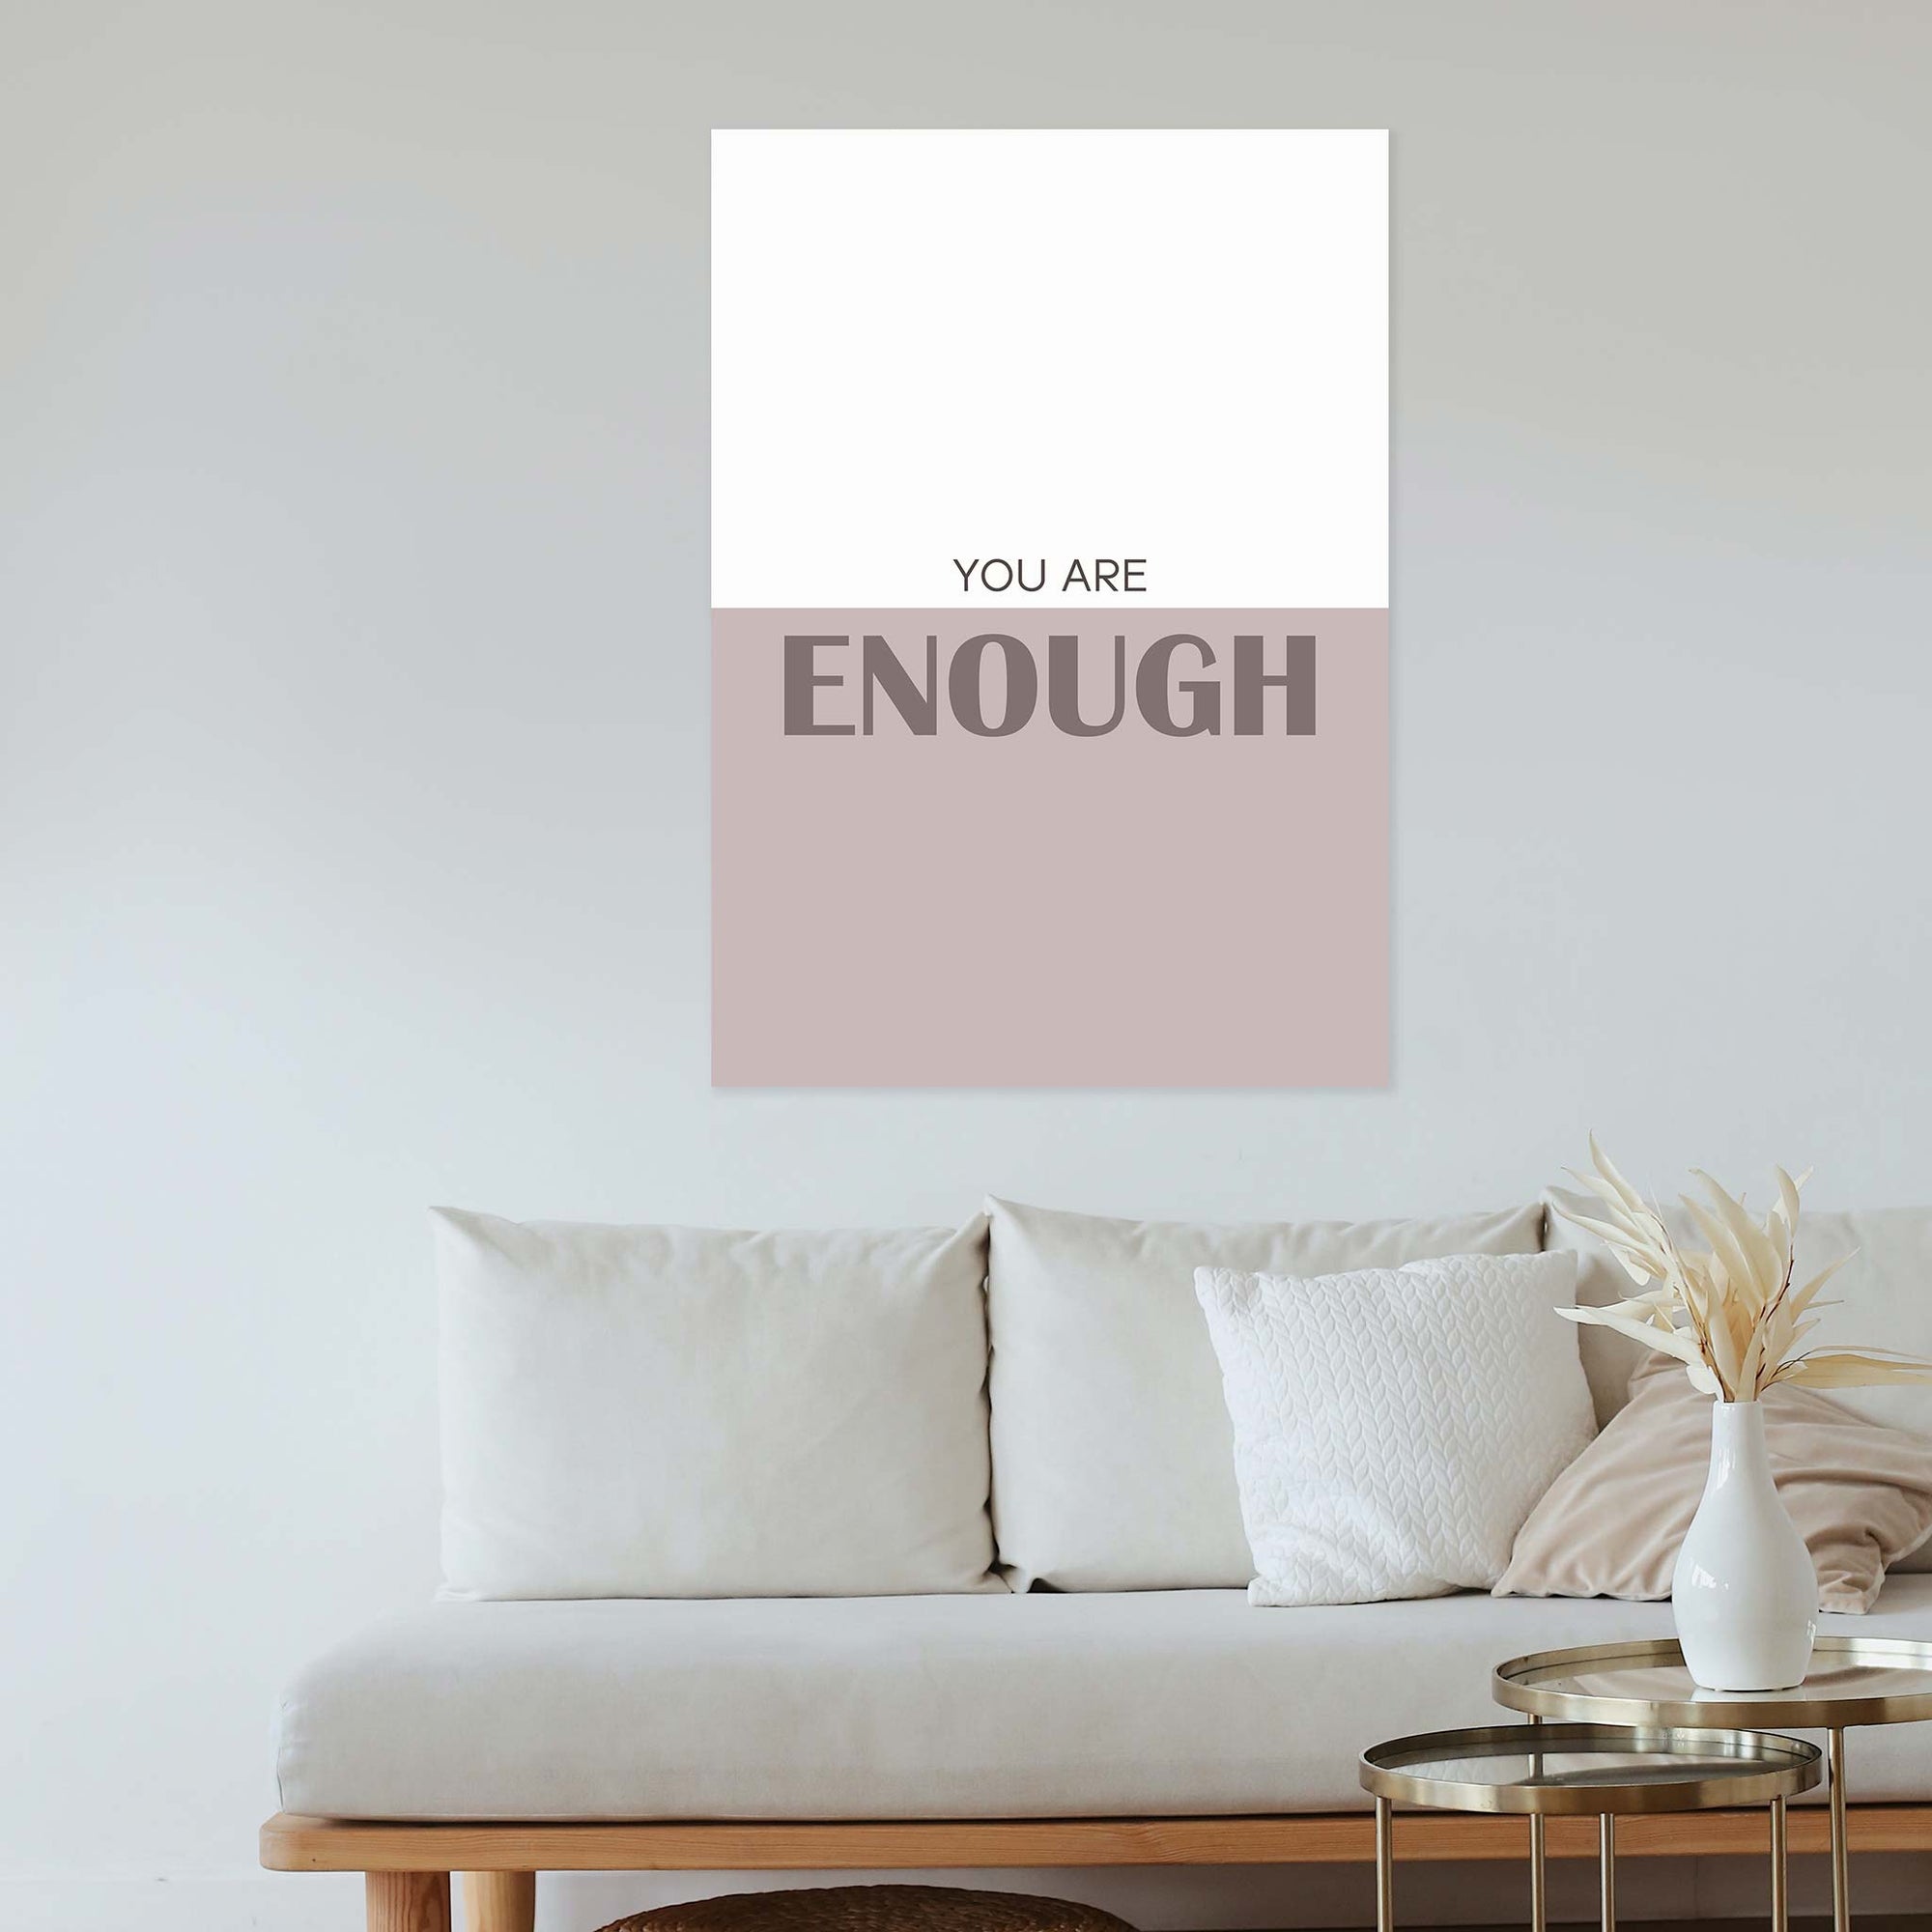 You are enough